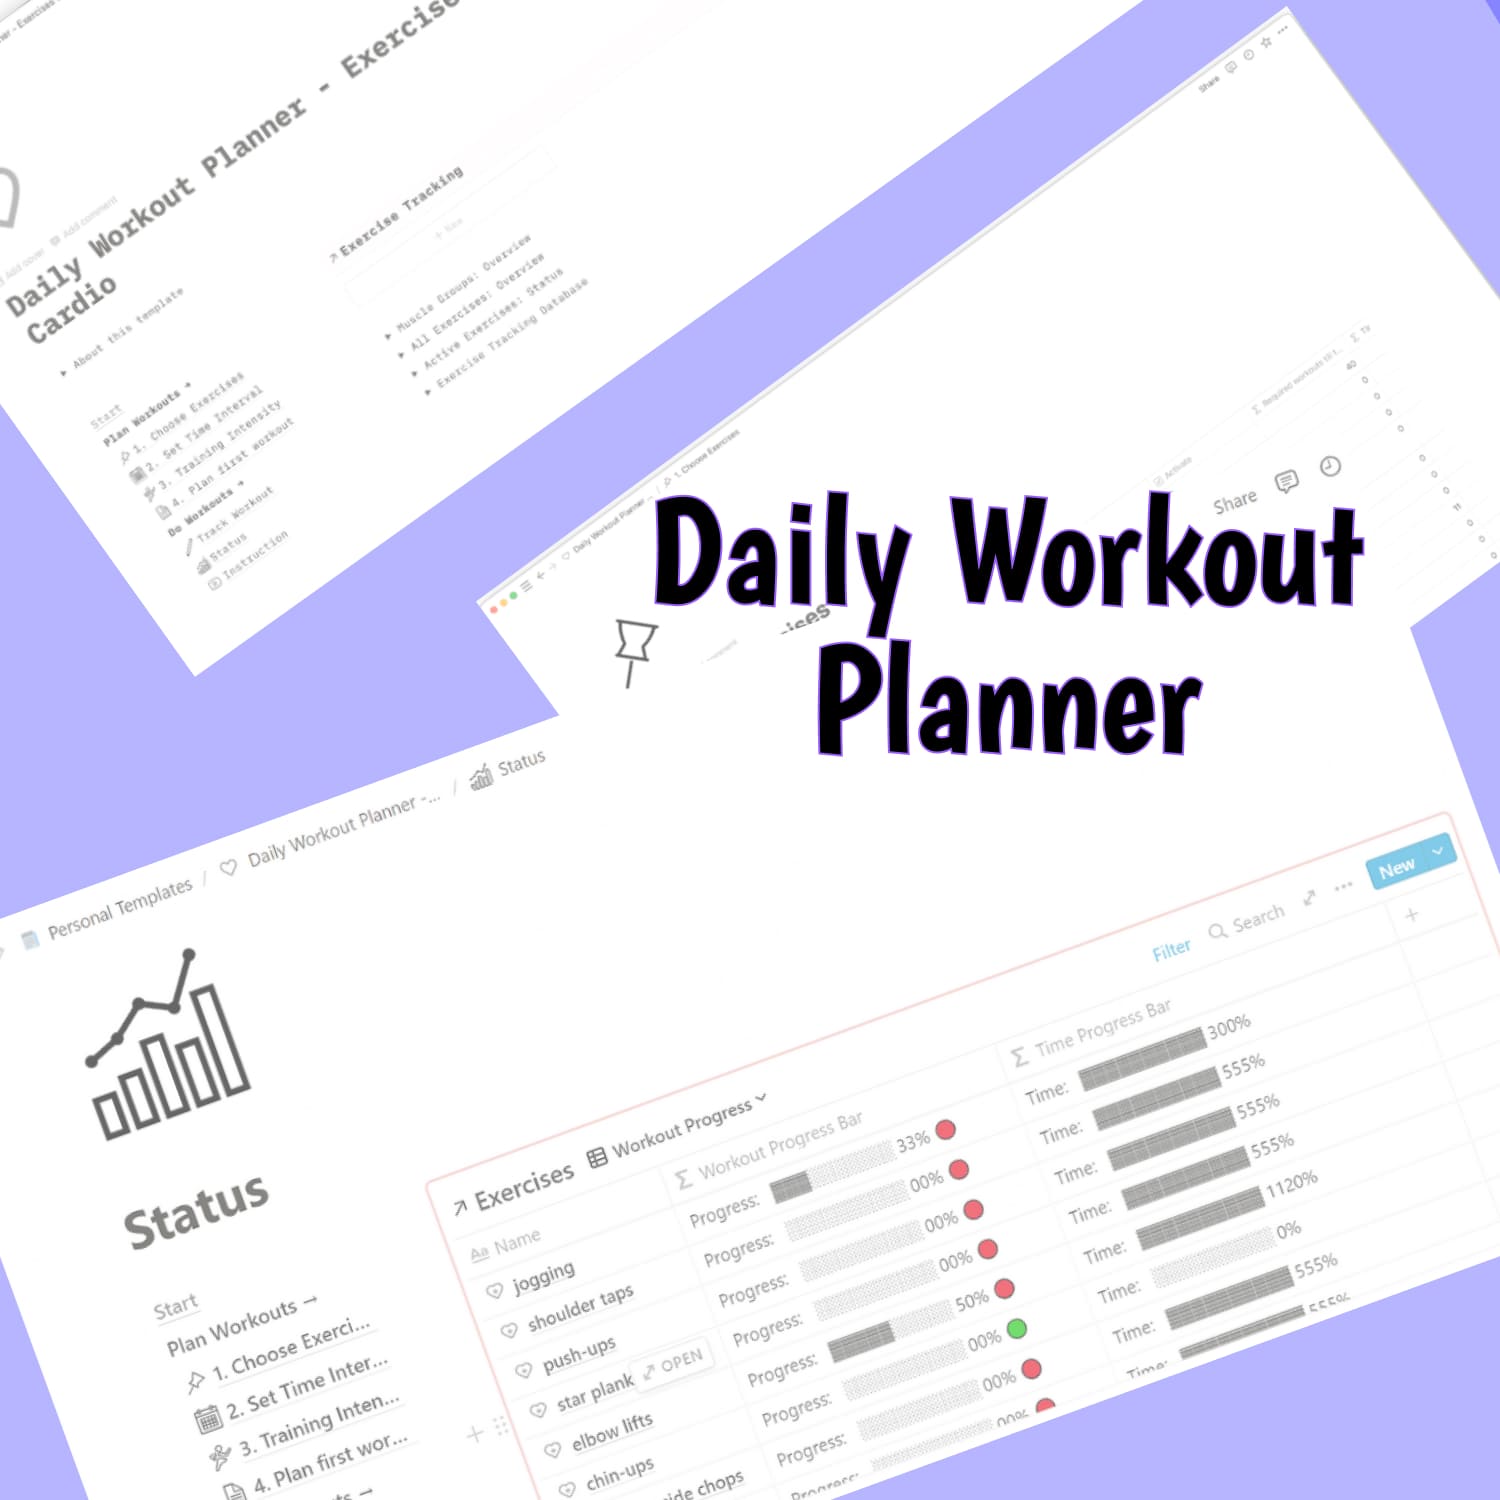 Daily Workout Planner In Notion.